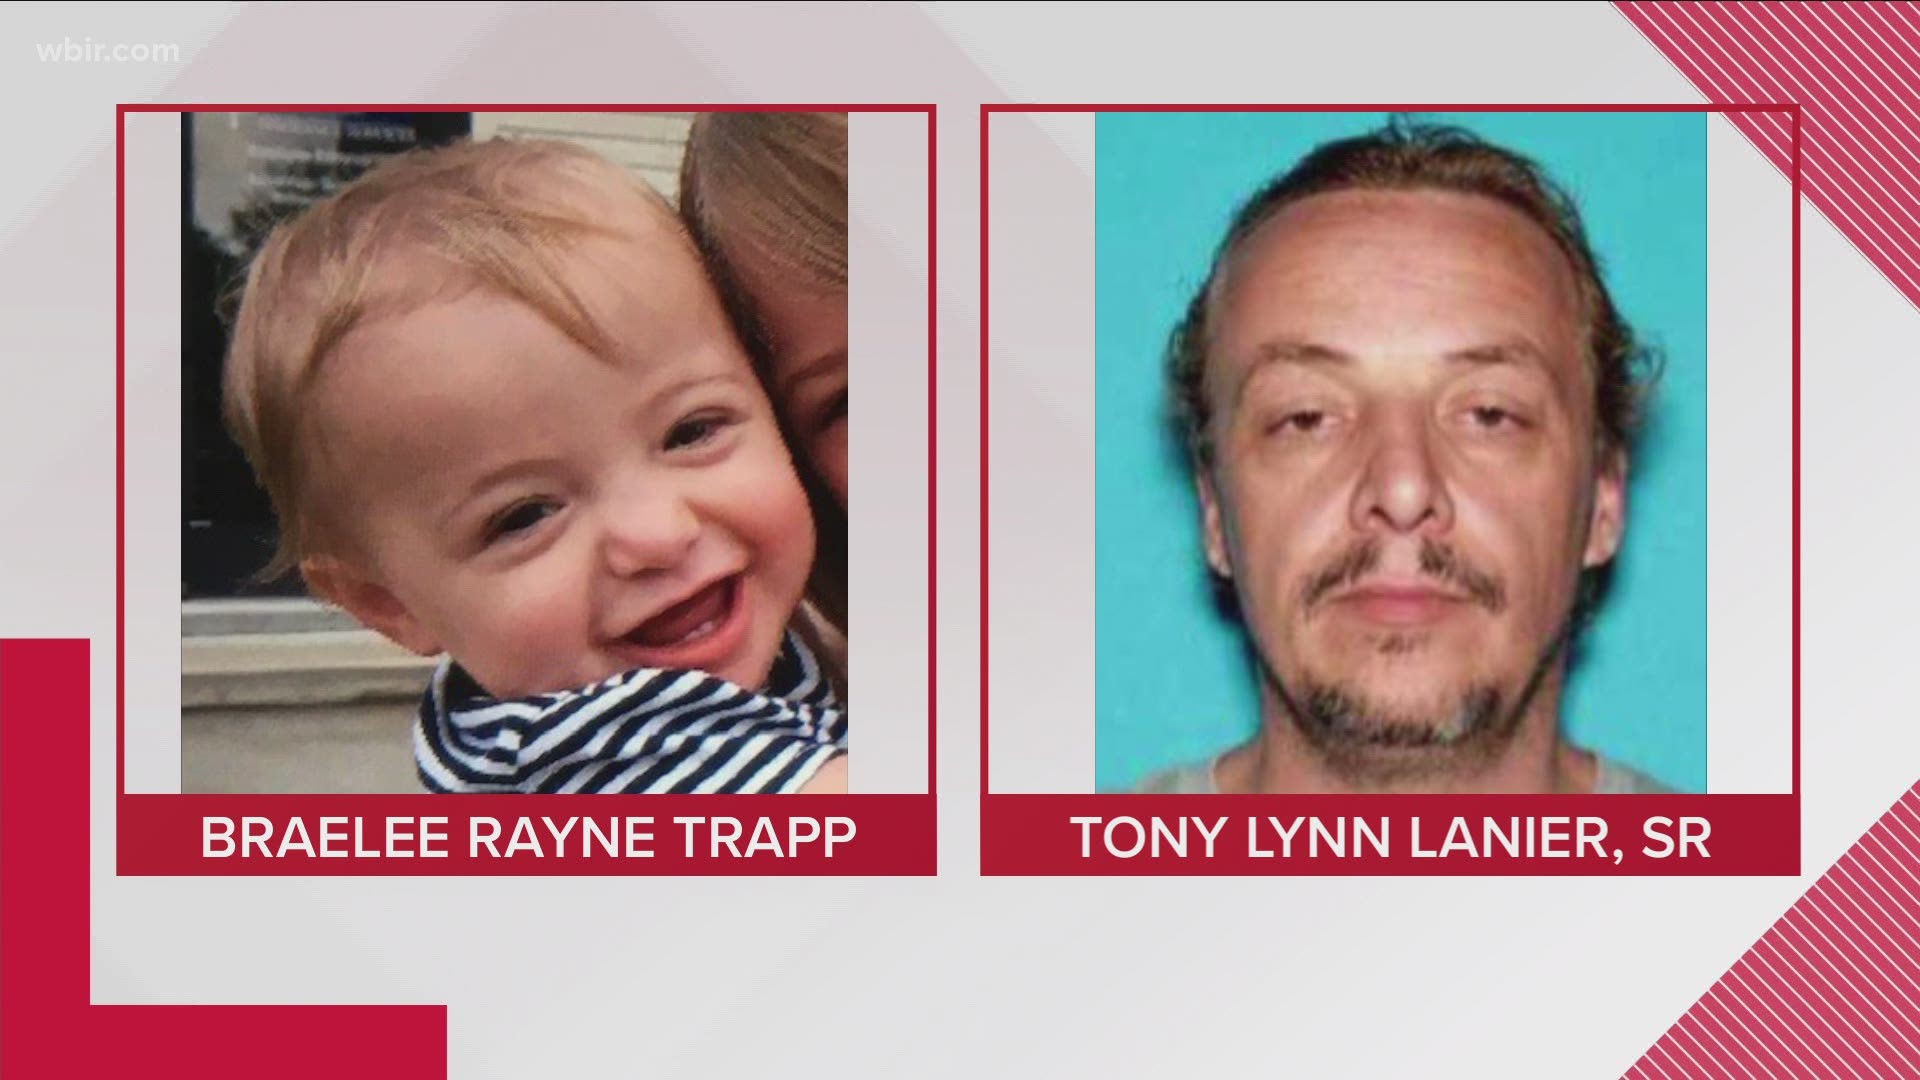 An AMBER Alert was issued for Braelee Rayne Trapp early Friday morning.